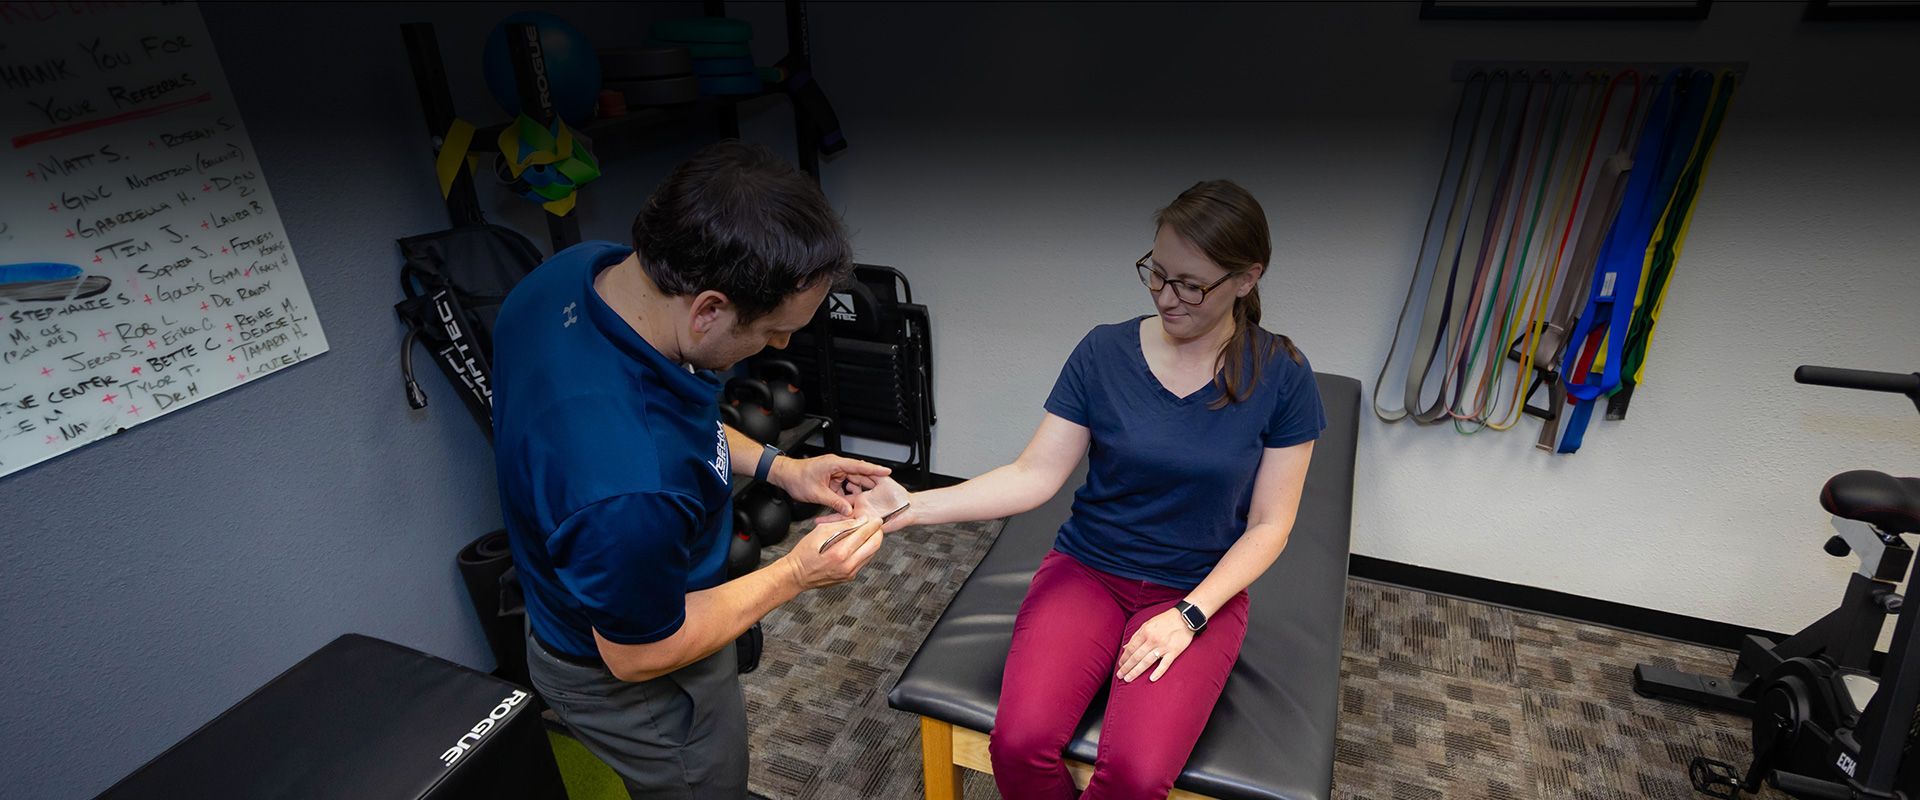 Instrument Assisted Soft Tissue Mobilization (IASTM) used on patient's hand